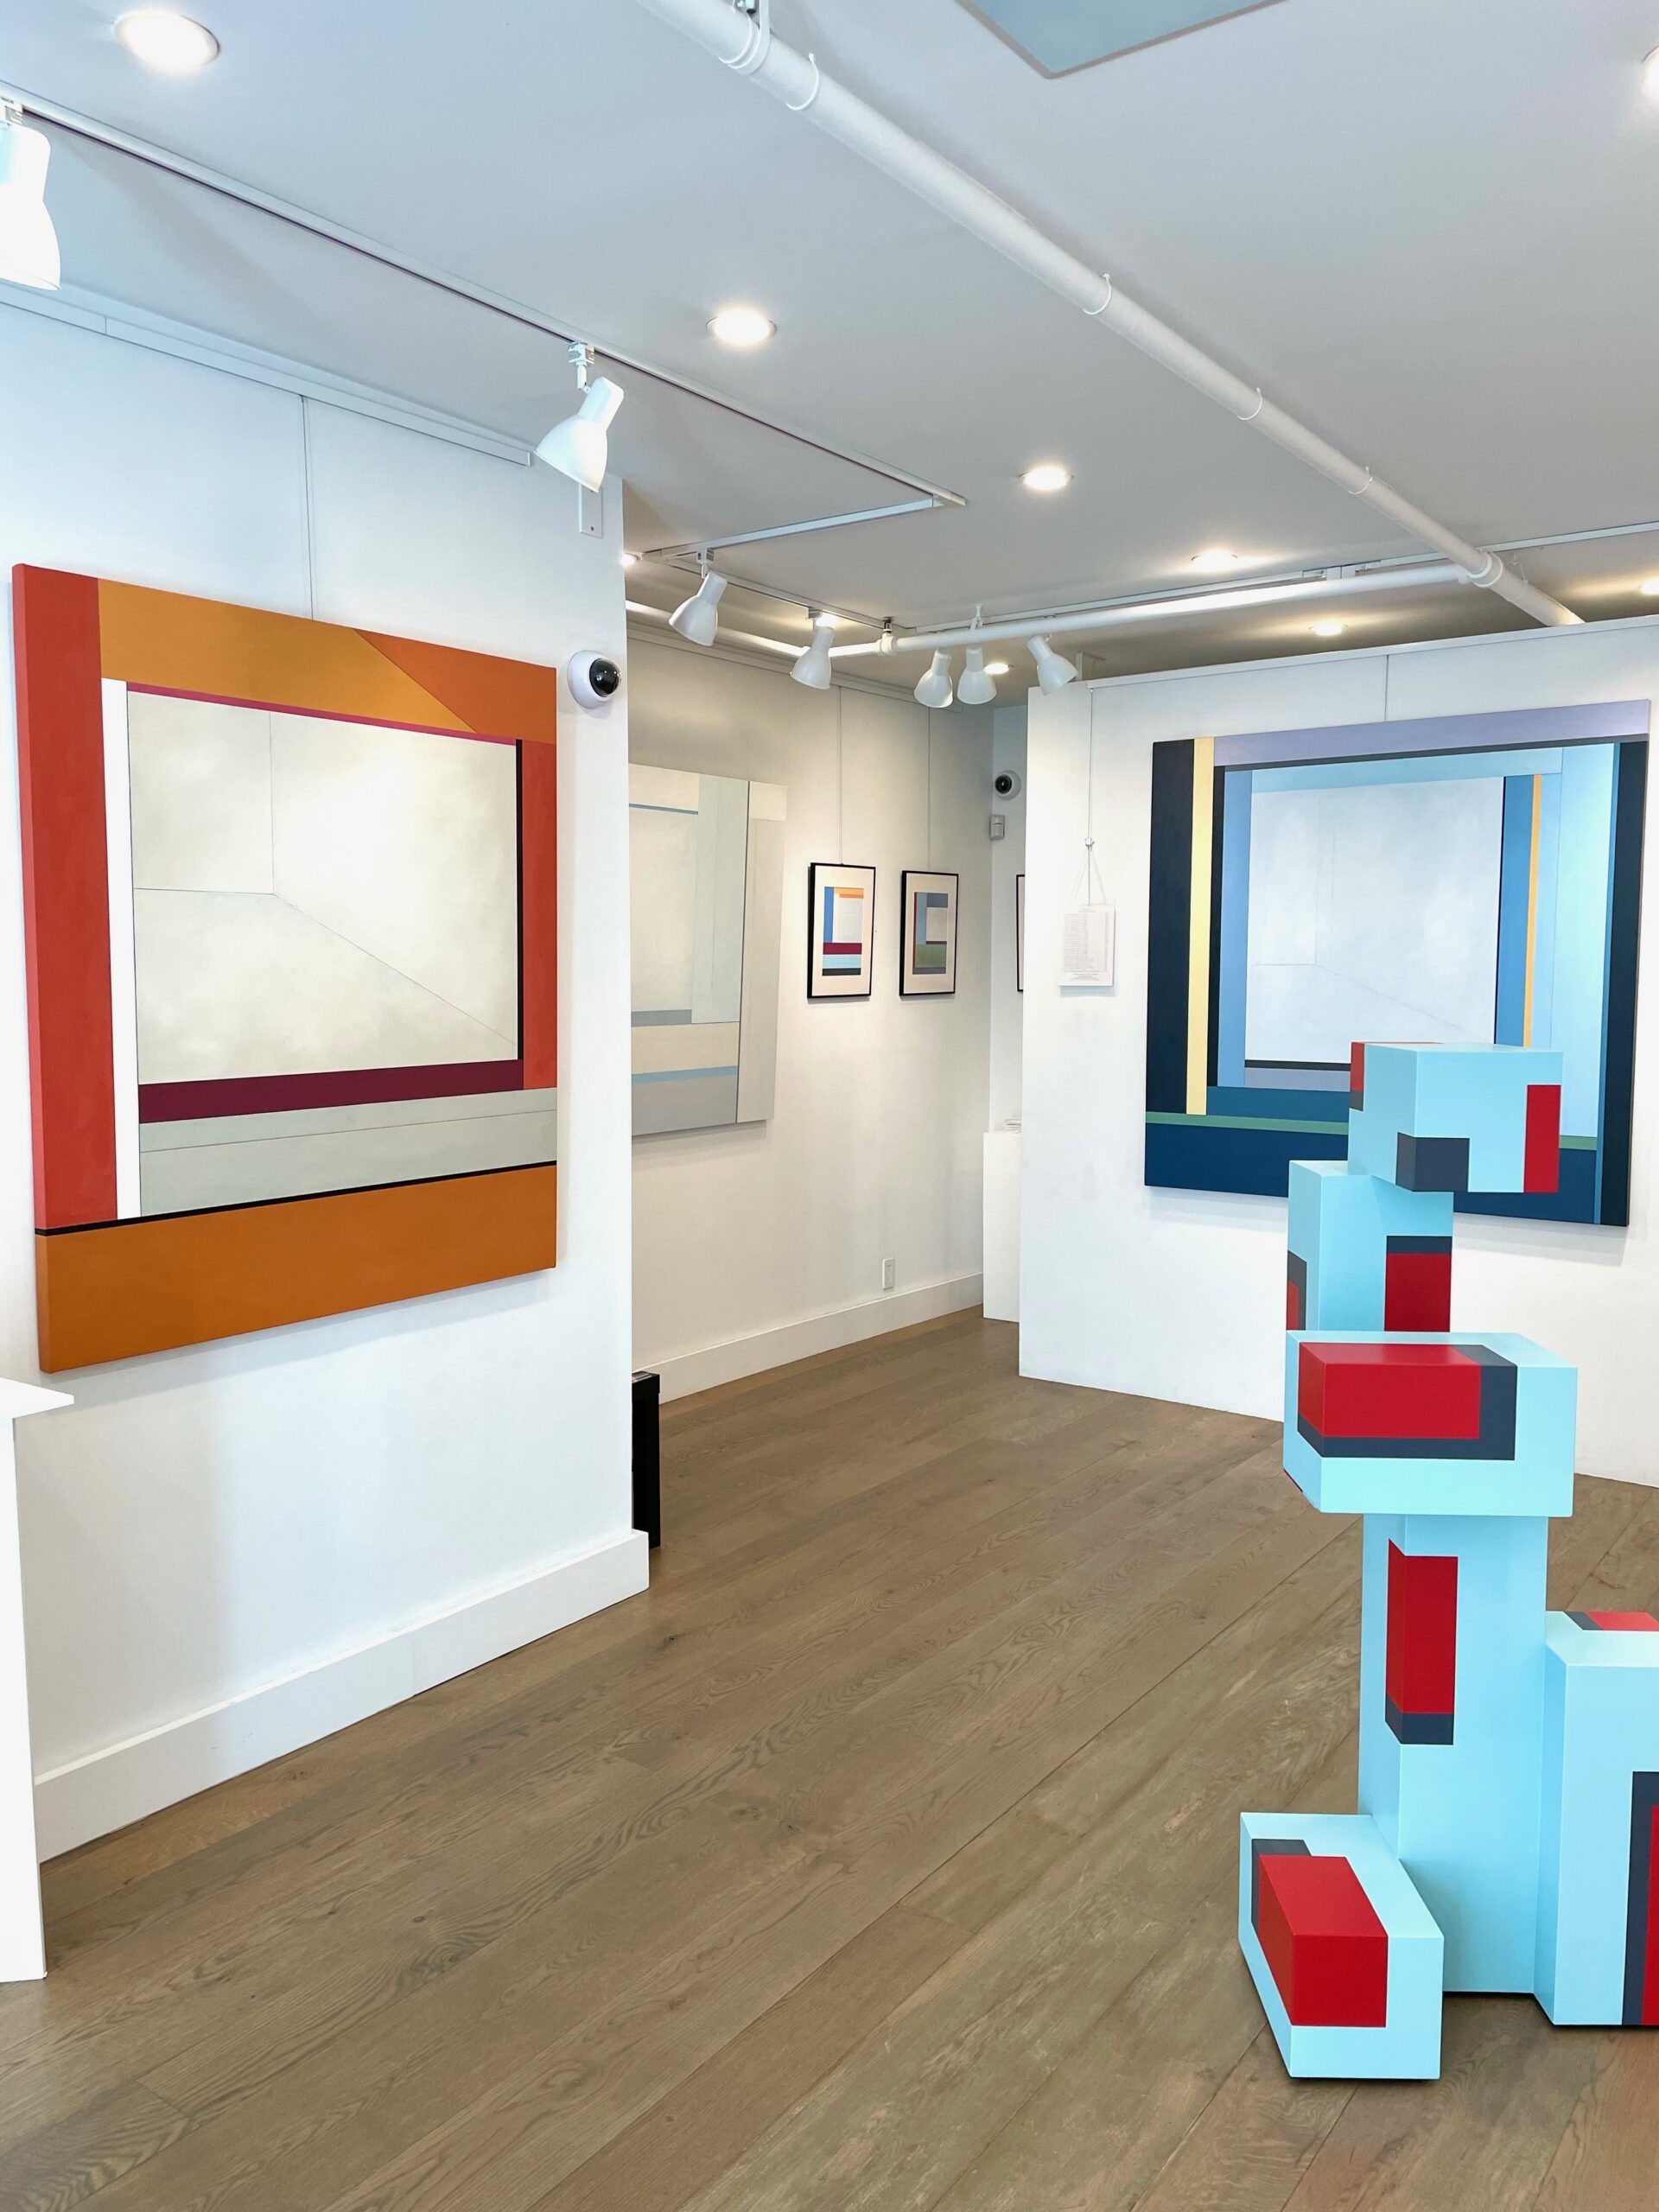 Chris Kelly's “The Eye of the Storm” installed at the Colm Rowan Fine Art gallery in East Hampton. COURTESY THE ARTIST